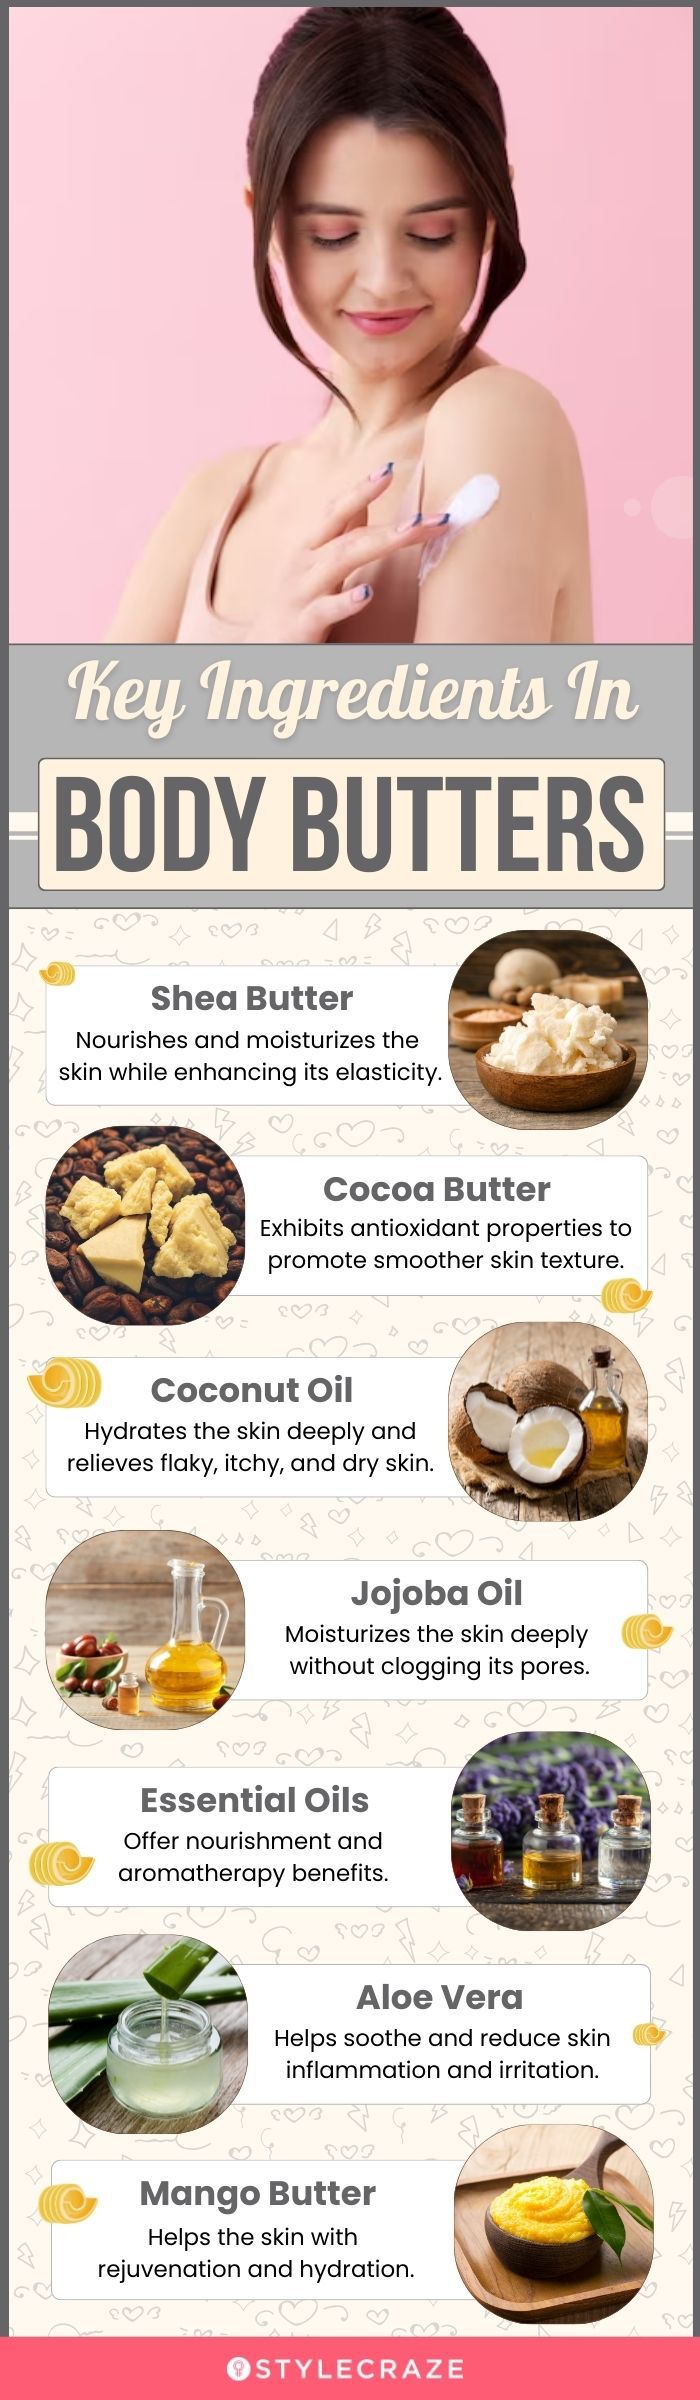 Key Ingredients In Body Butters (infographic)